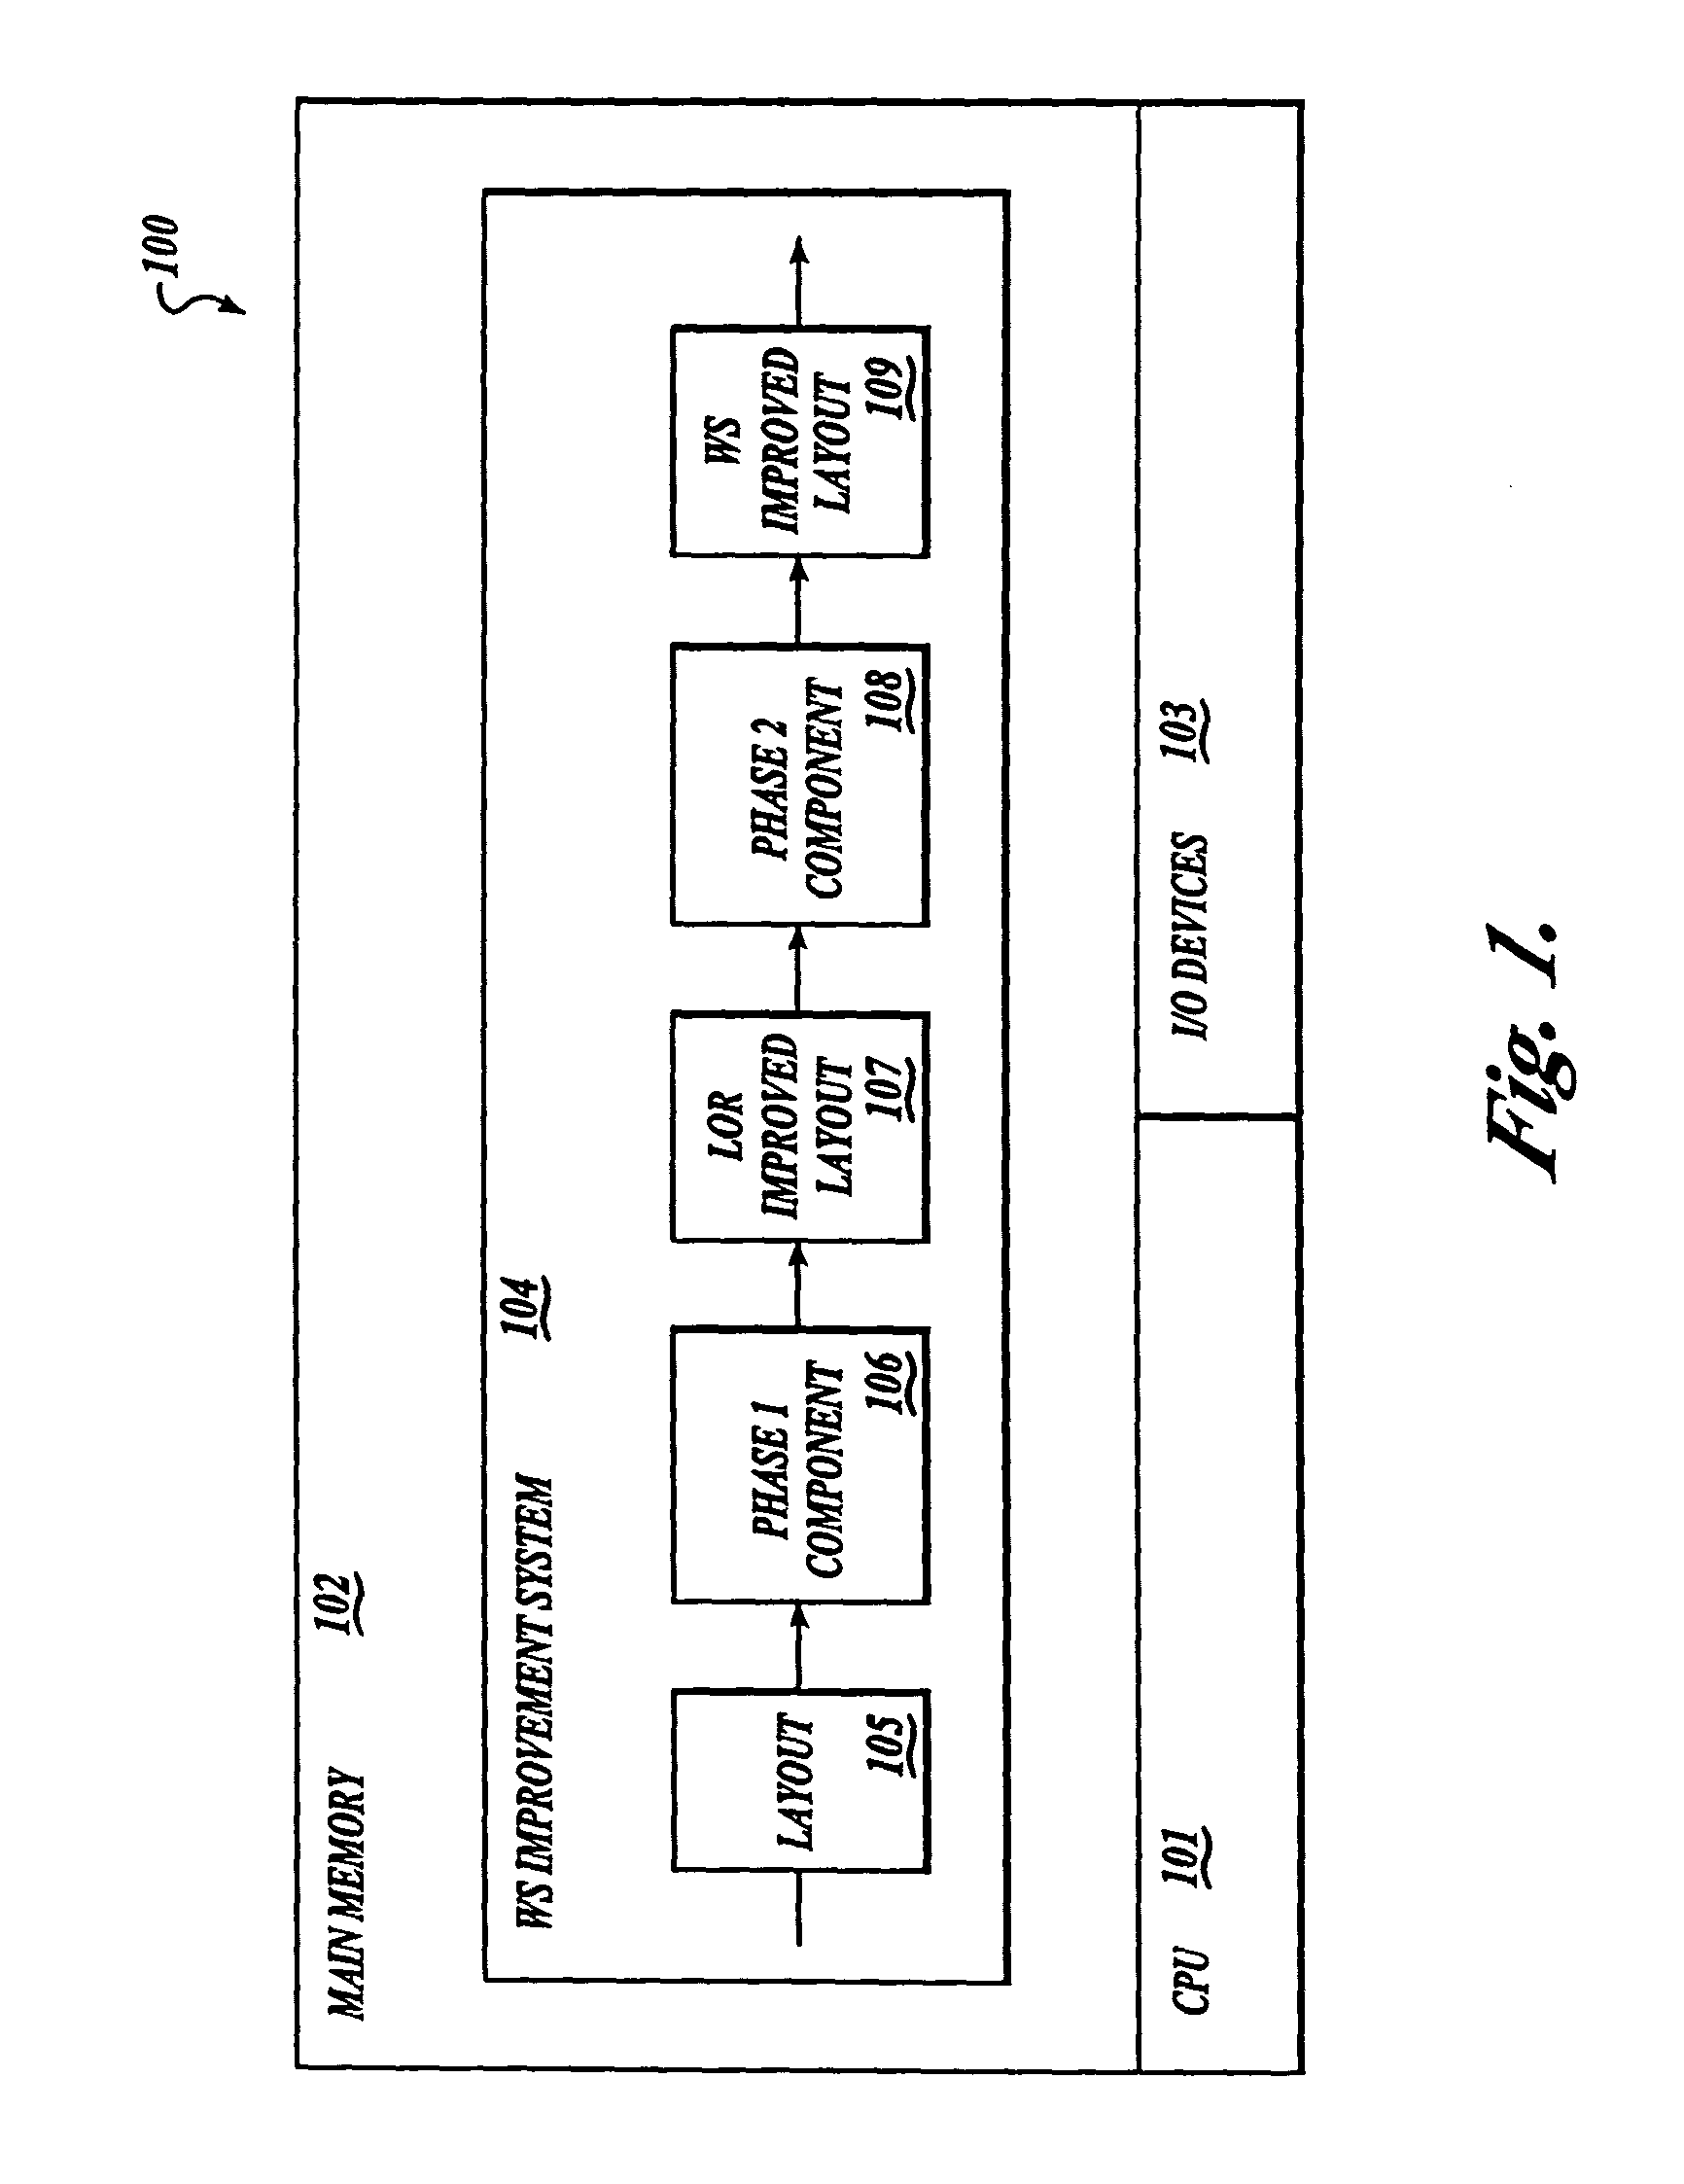 Method and system for controlling the improving of a program layout